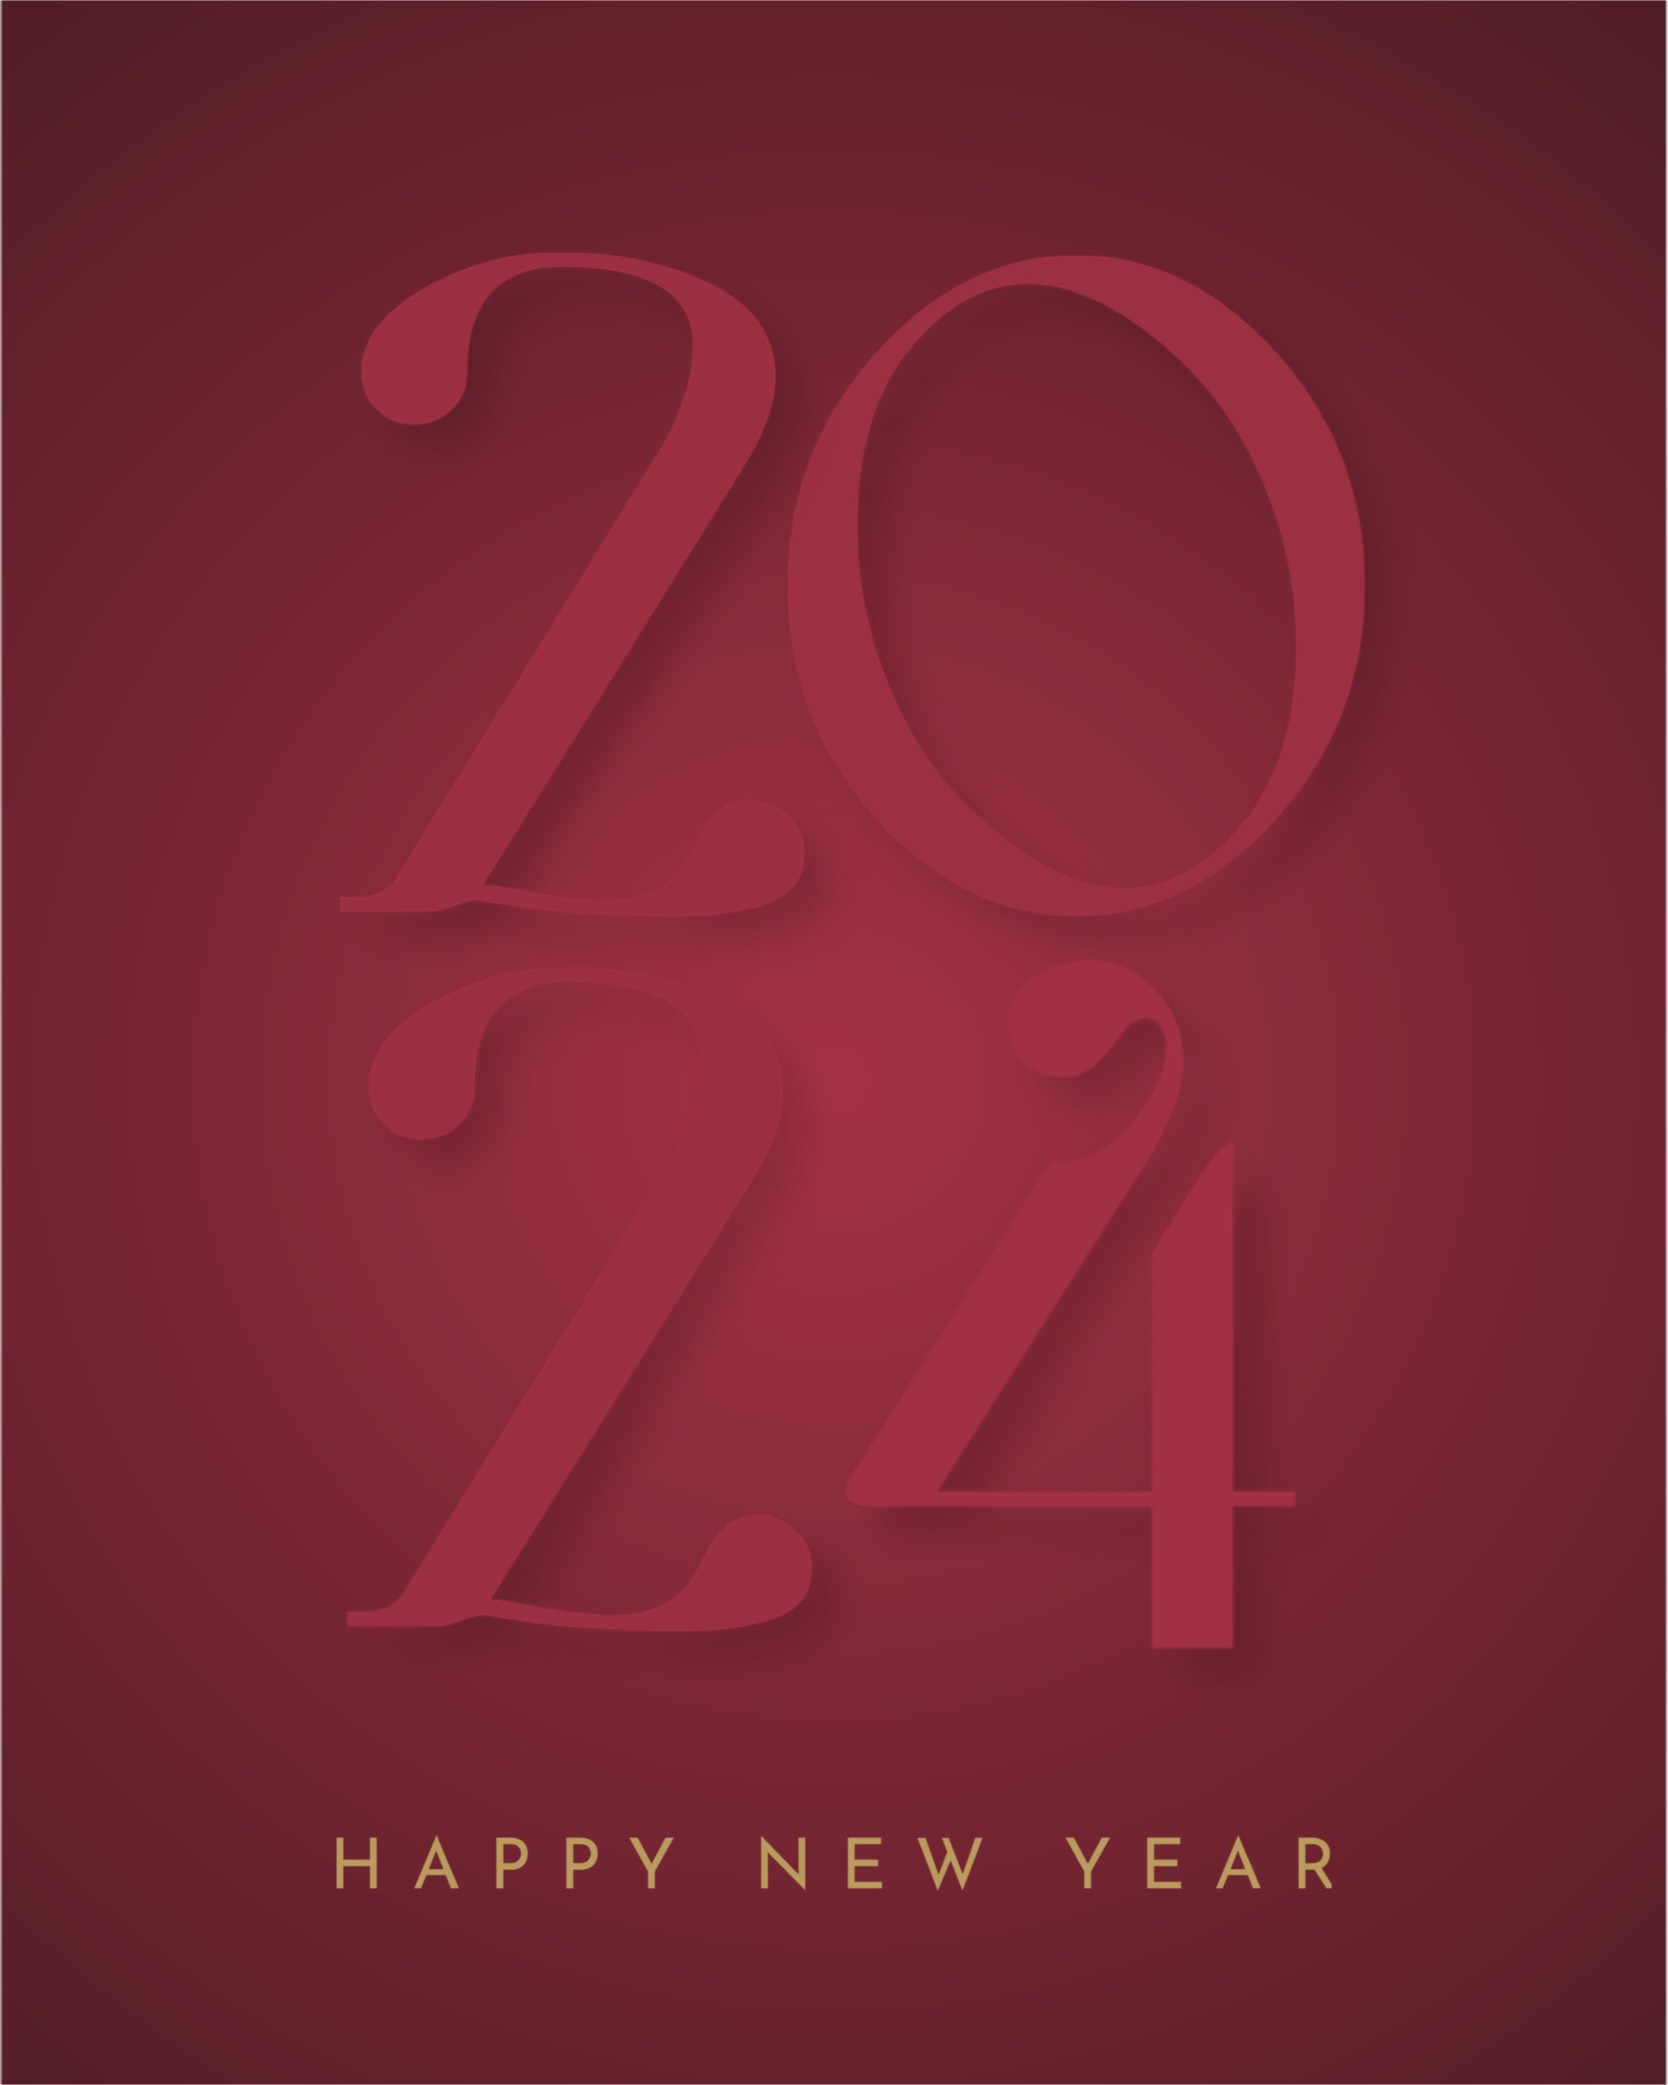 A red And Gold Happy New Year Template